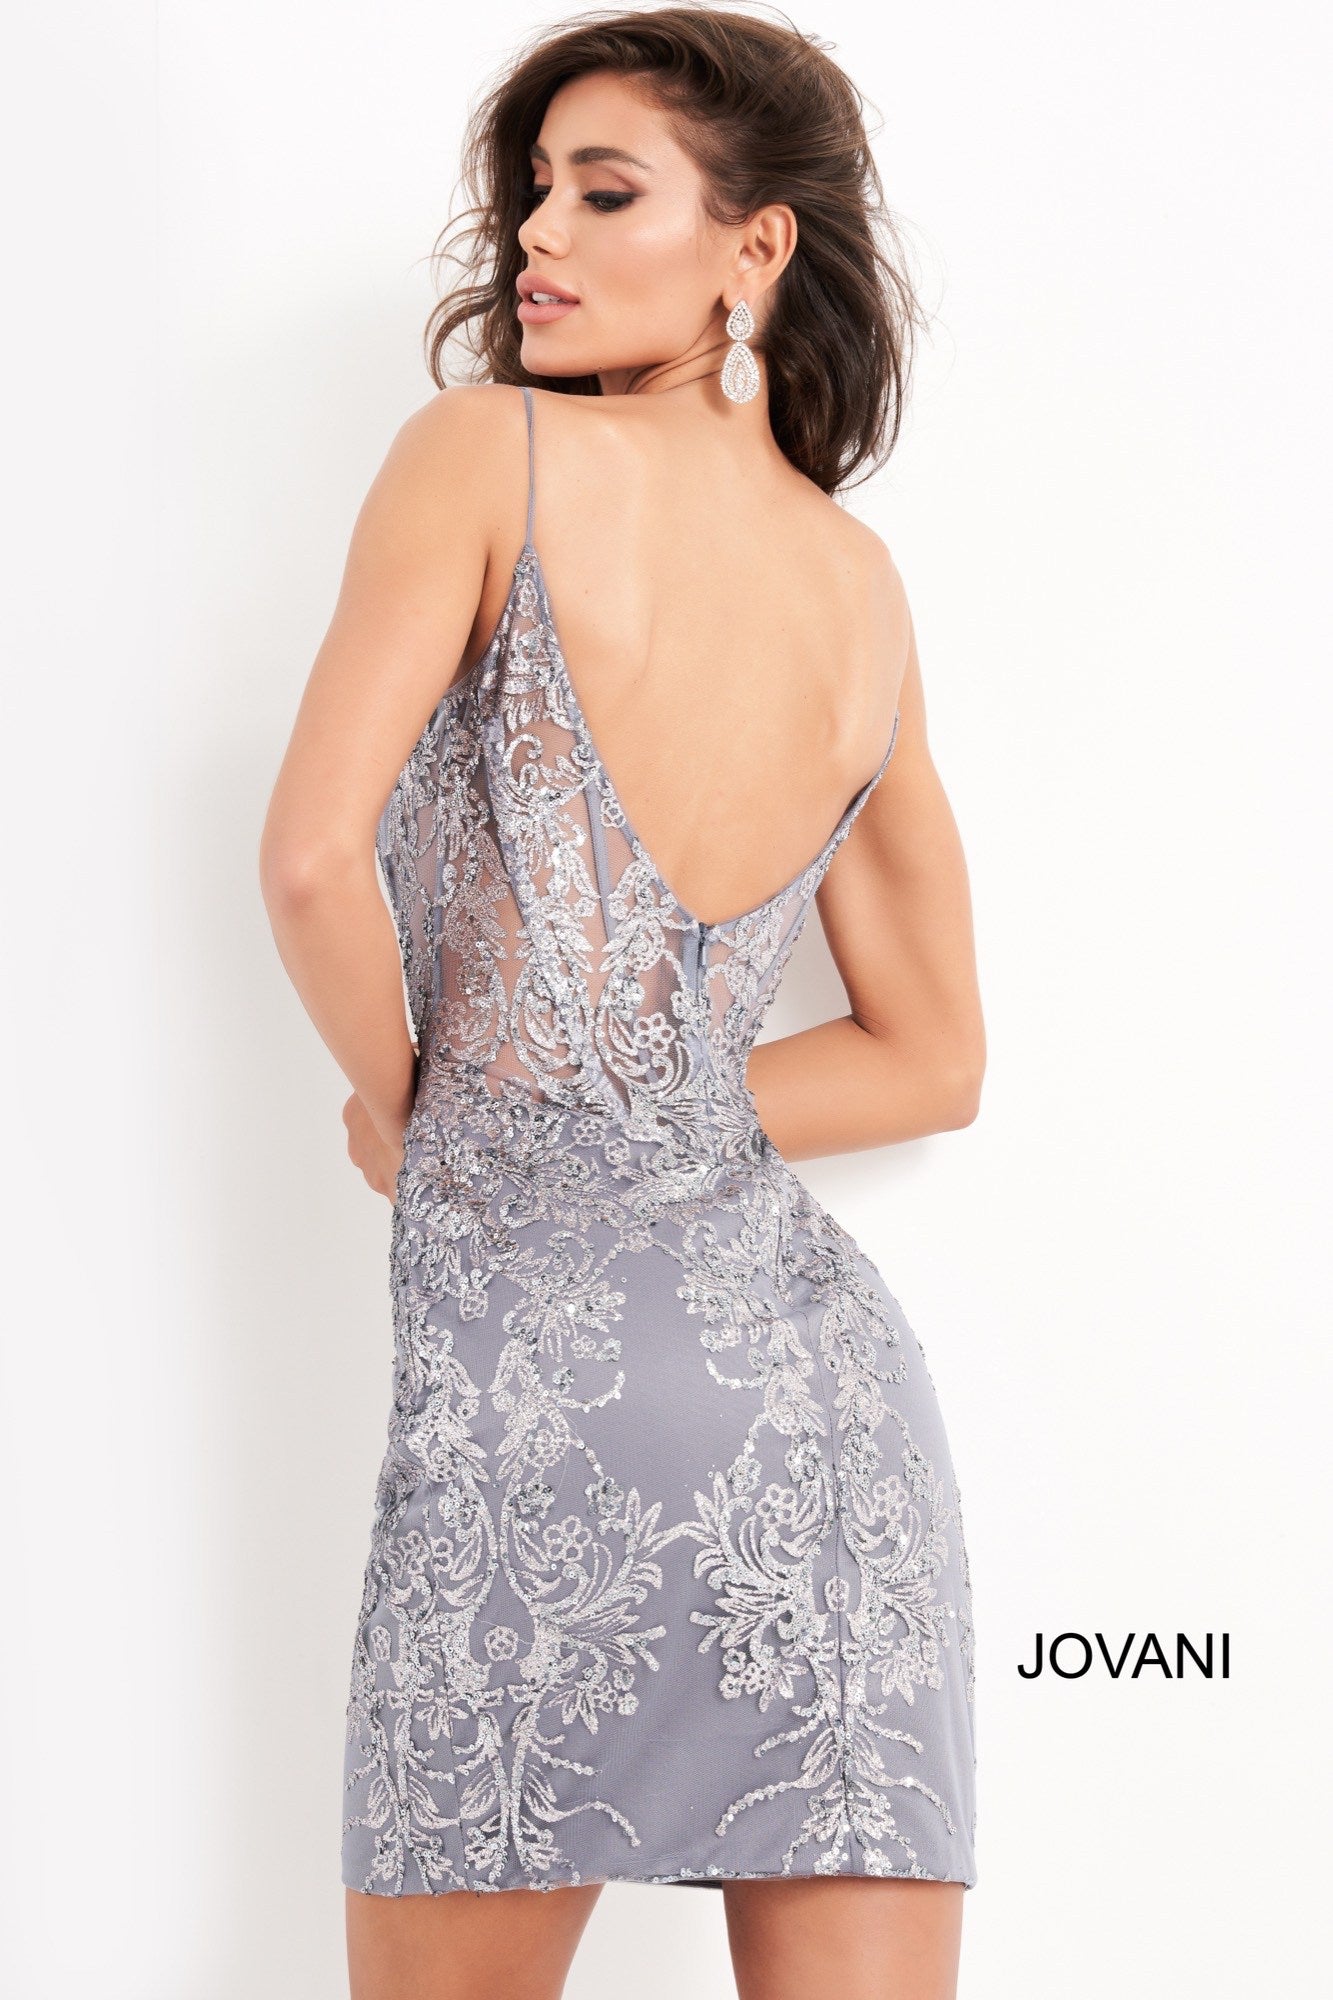 Jovani 04699 is a short fitted formal cocktail evening dress. Great for Prom, Pageants, Homecoming & More! This Gown Features a Sheer Corset Fitted Bodice with boning and a plunging neckline. Open scoop back with sheer panel and tulle spaghetti straps. The entire gown is Embellished with petite sequins and Glitter in a floral scroll pattern. Glass Slipper Formals